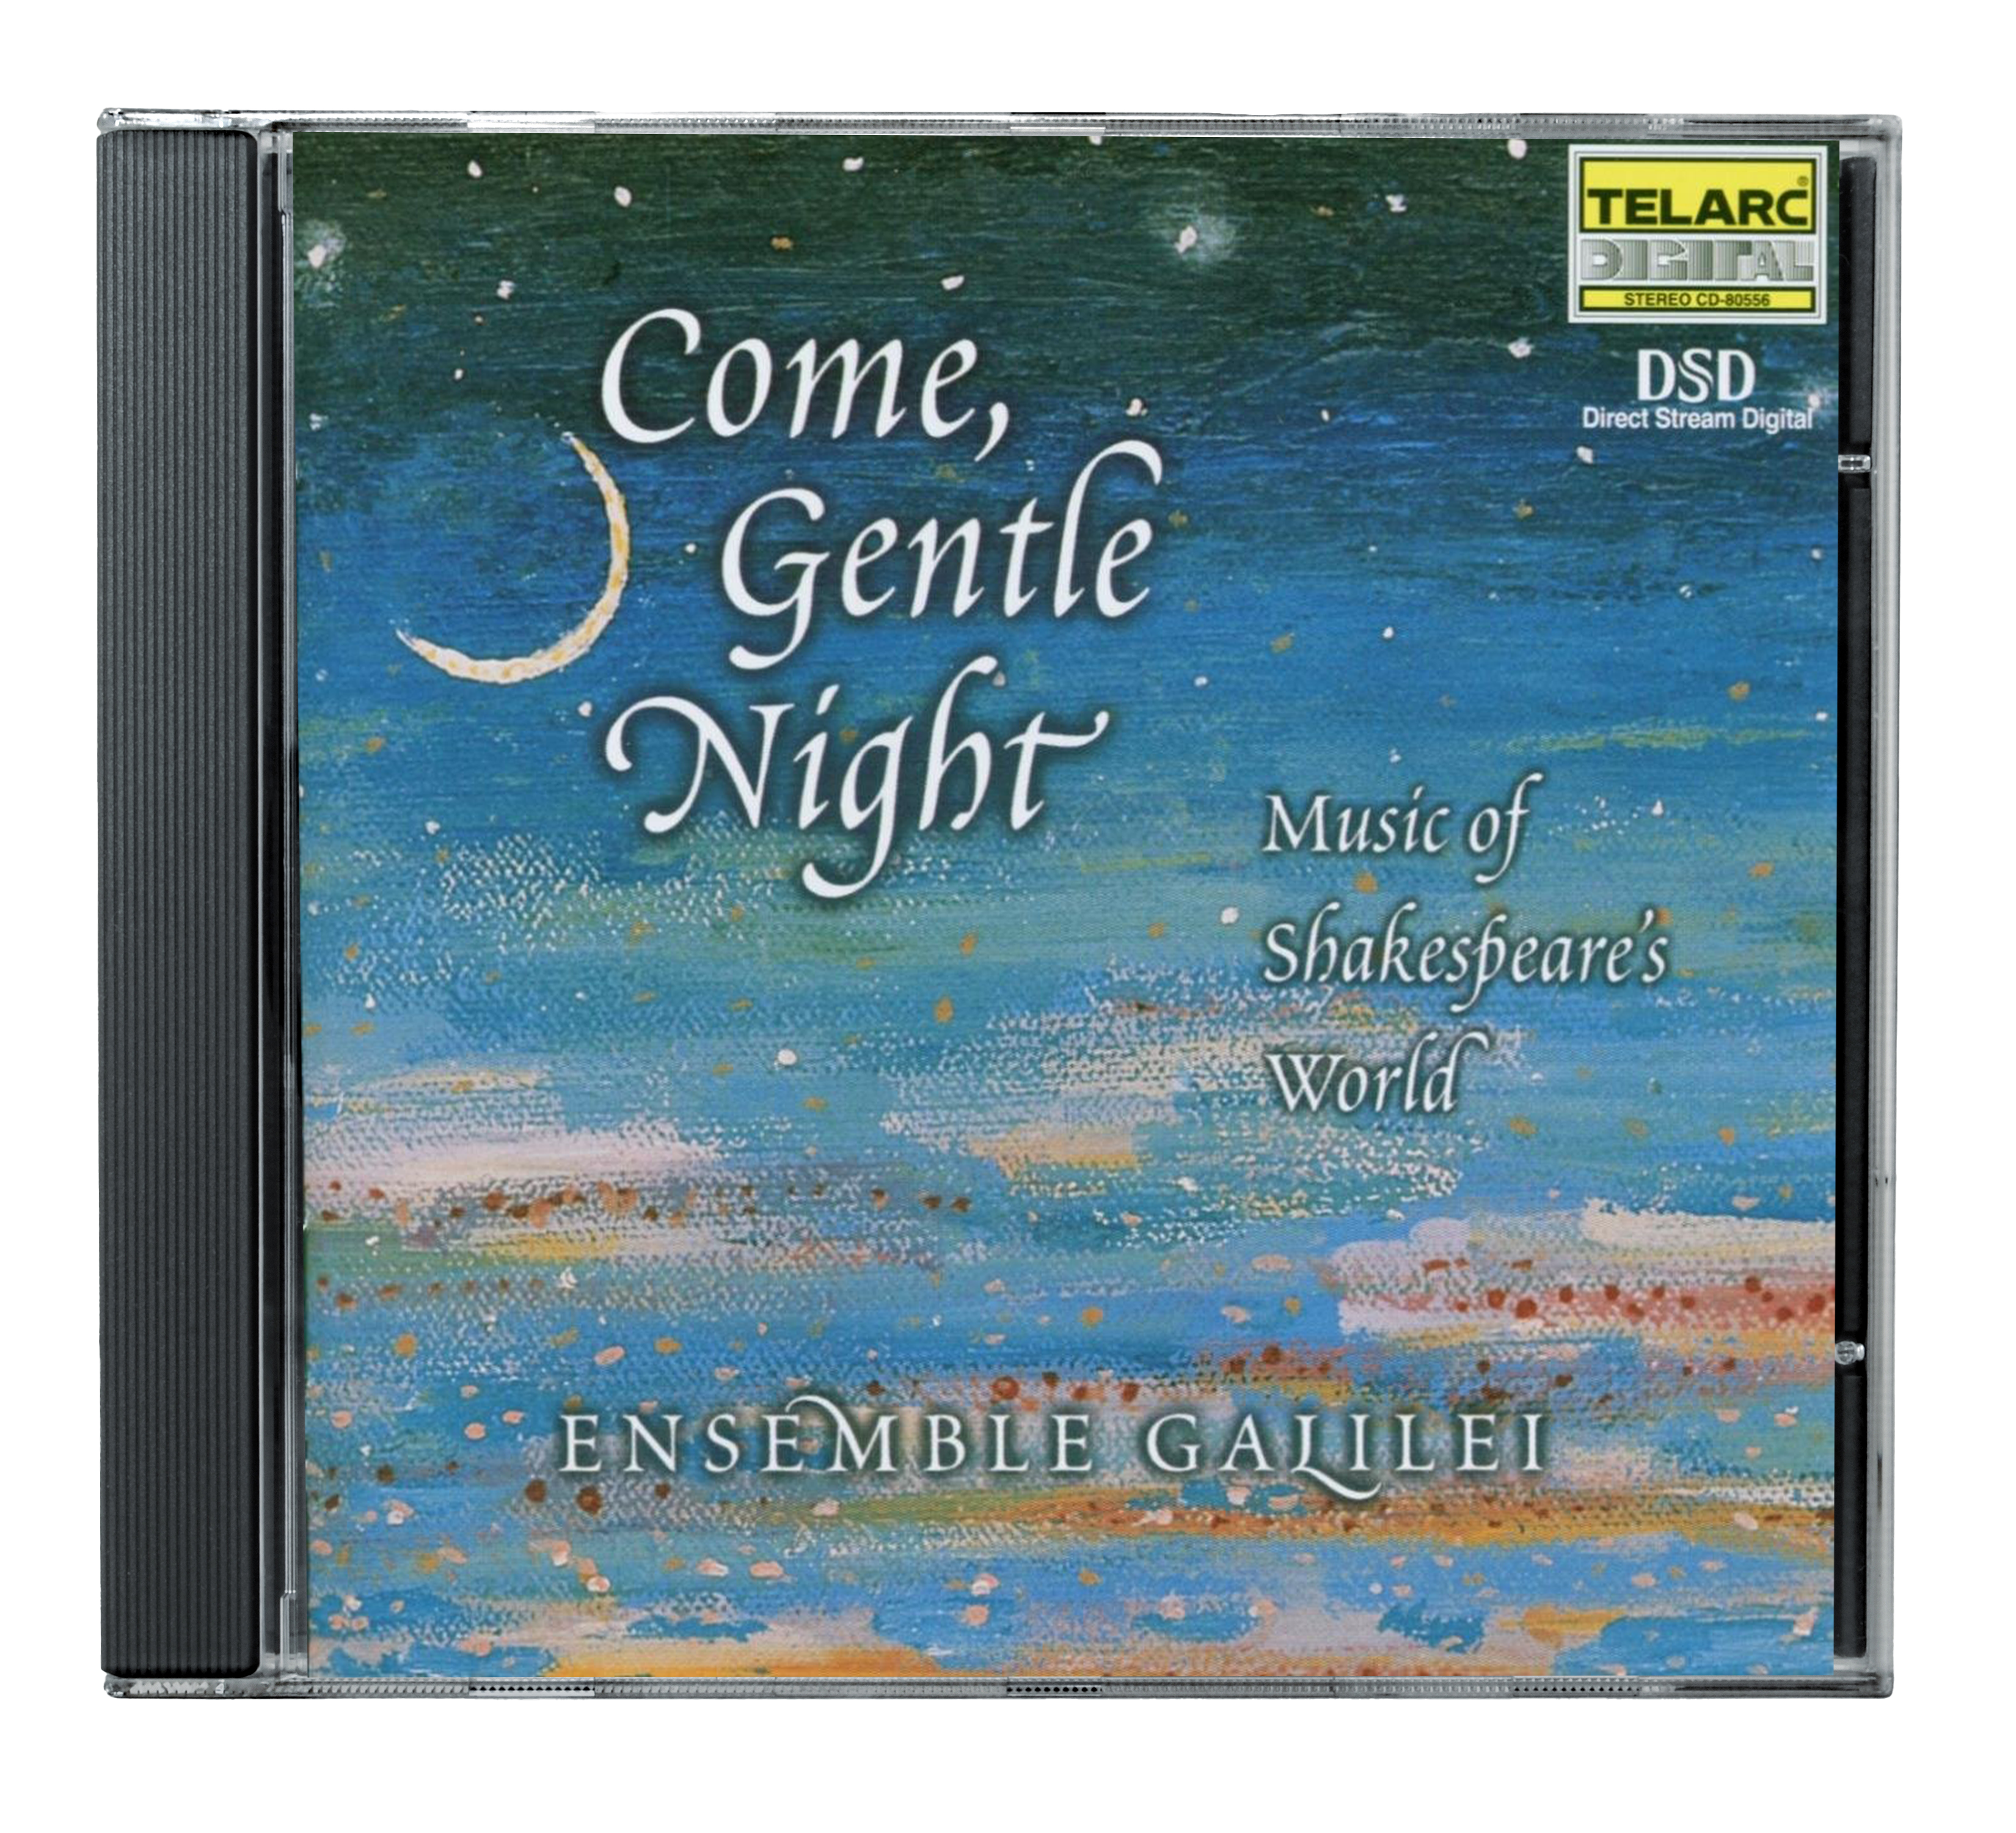 CD cover painted blue night sky